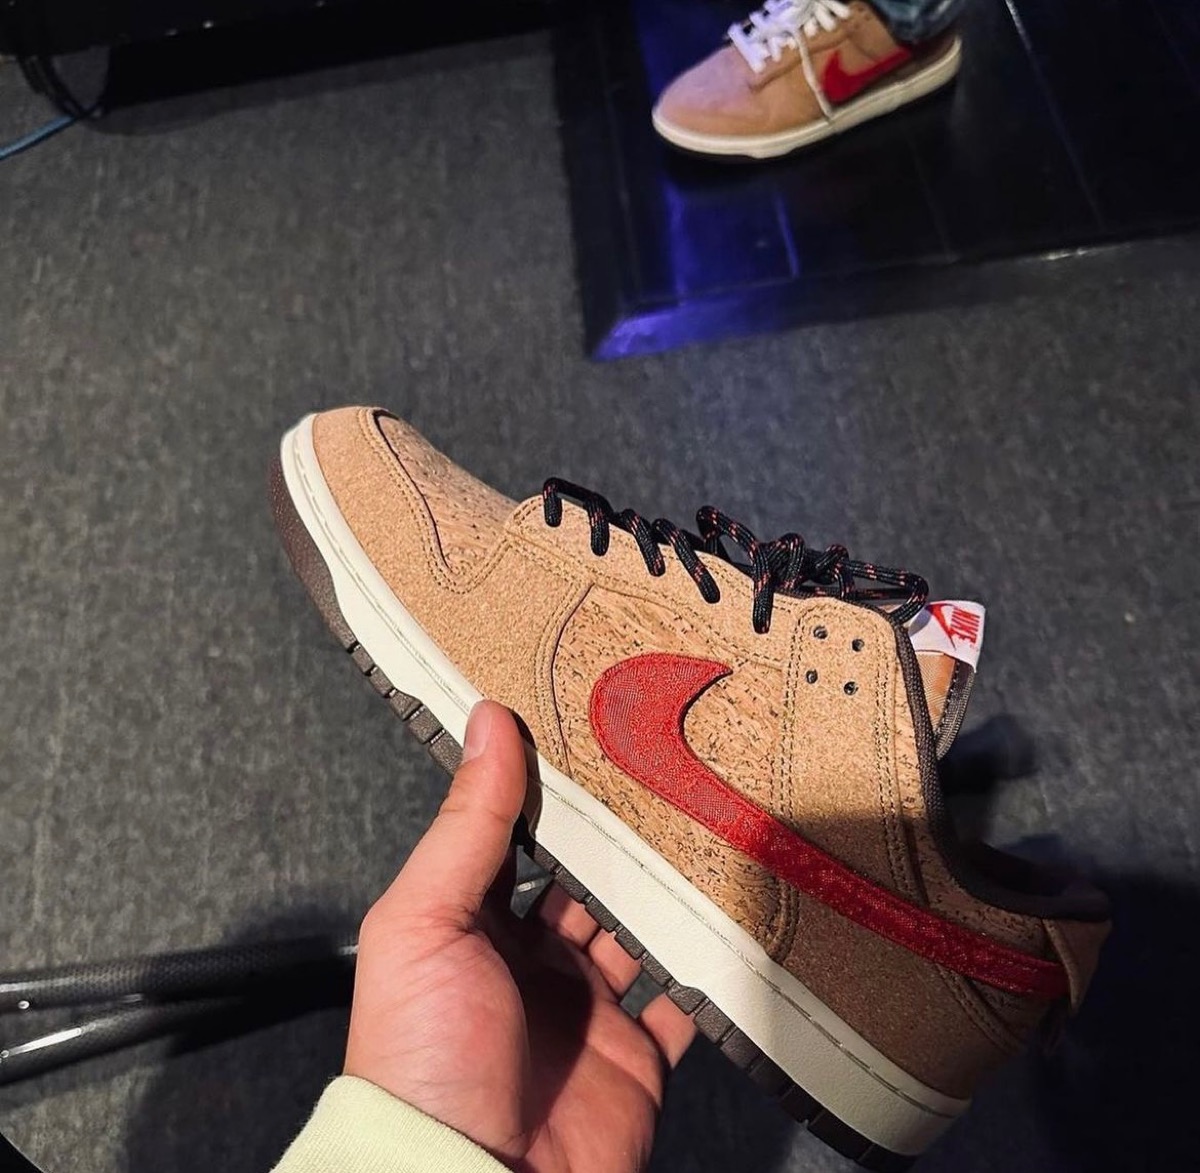 CLOT × Nike Dunk Low SP “Cork”が国内6月30日より発売［FN0317-121 